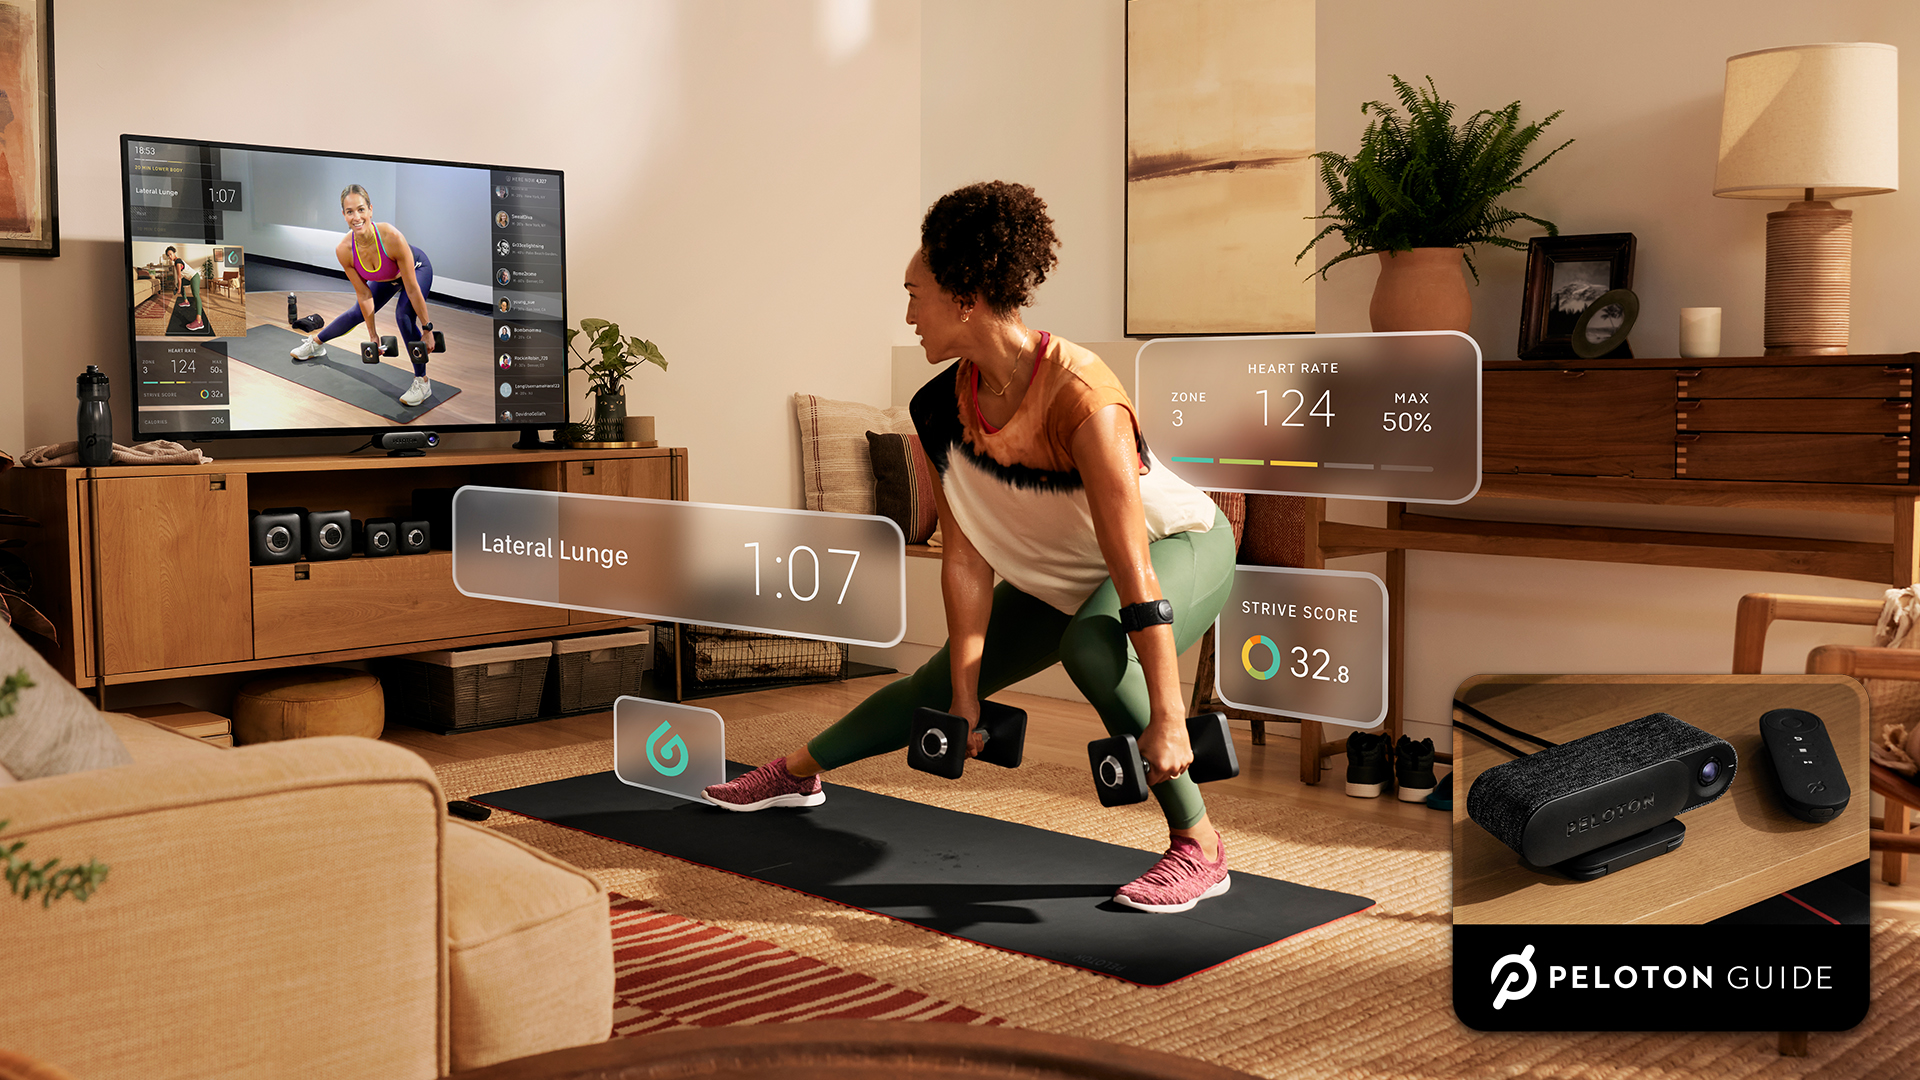 Photo of a person using a Peloton guide in their living room